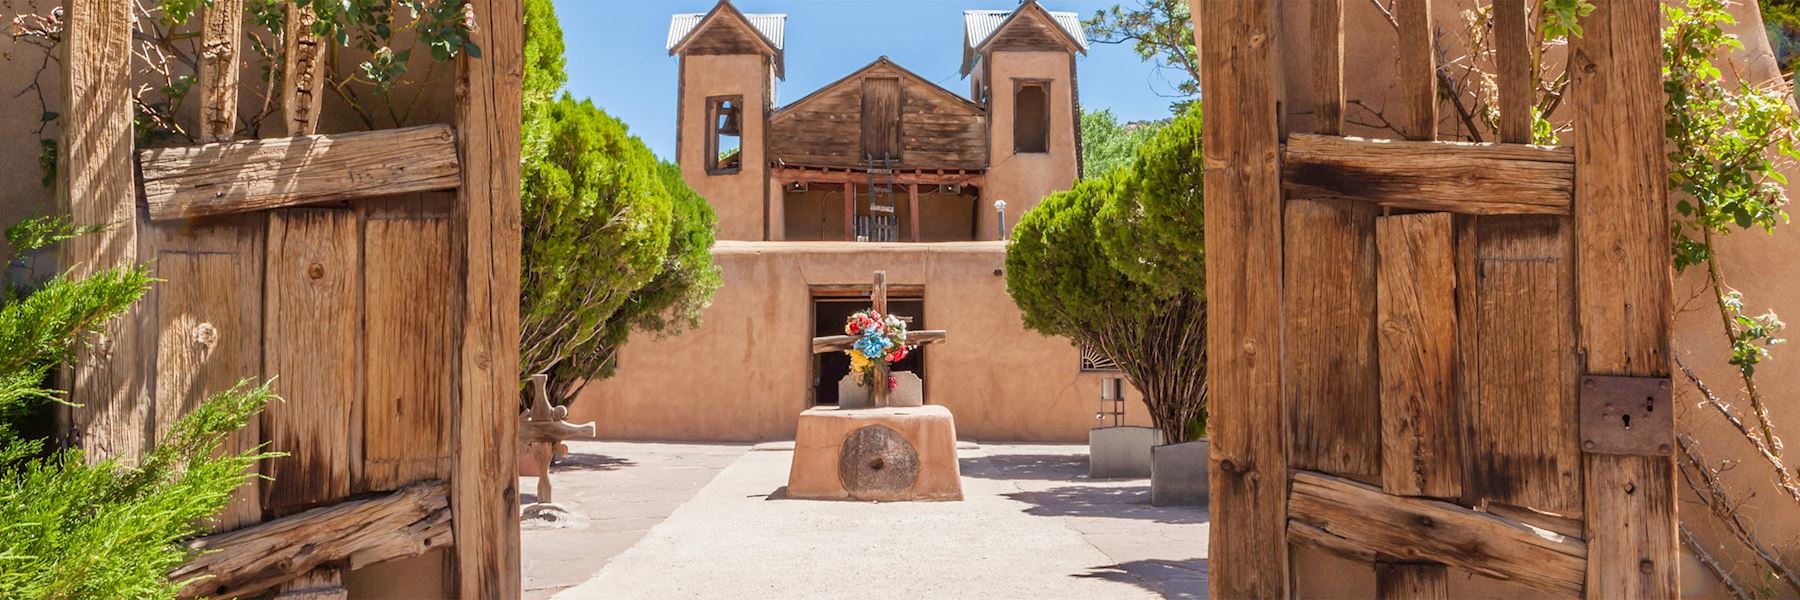 Visit Santa Fe on a trip to The USA | Audley Travel